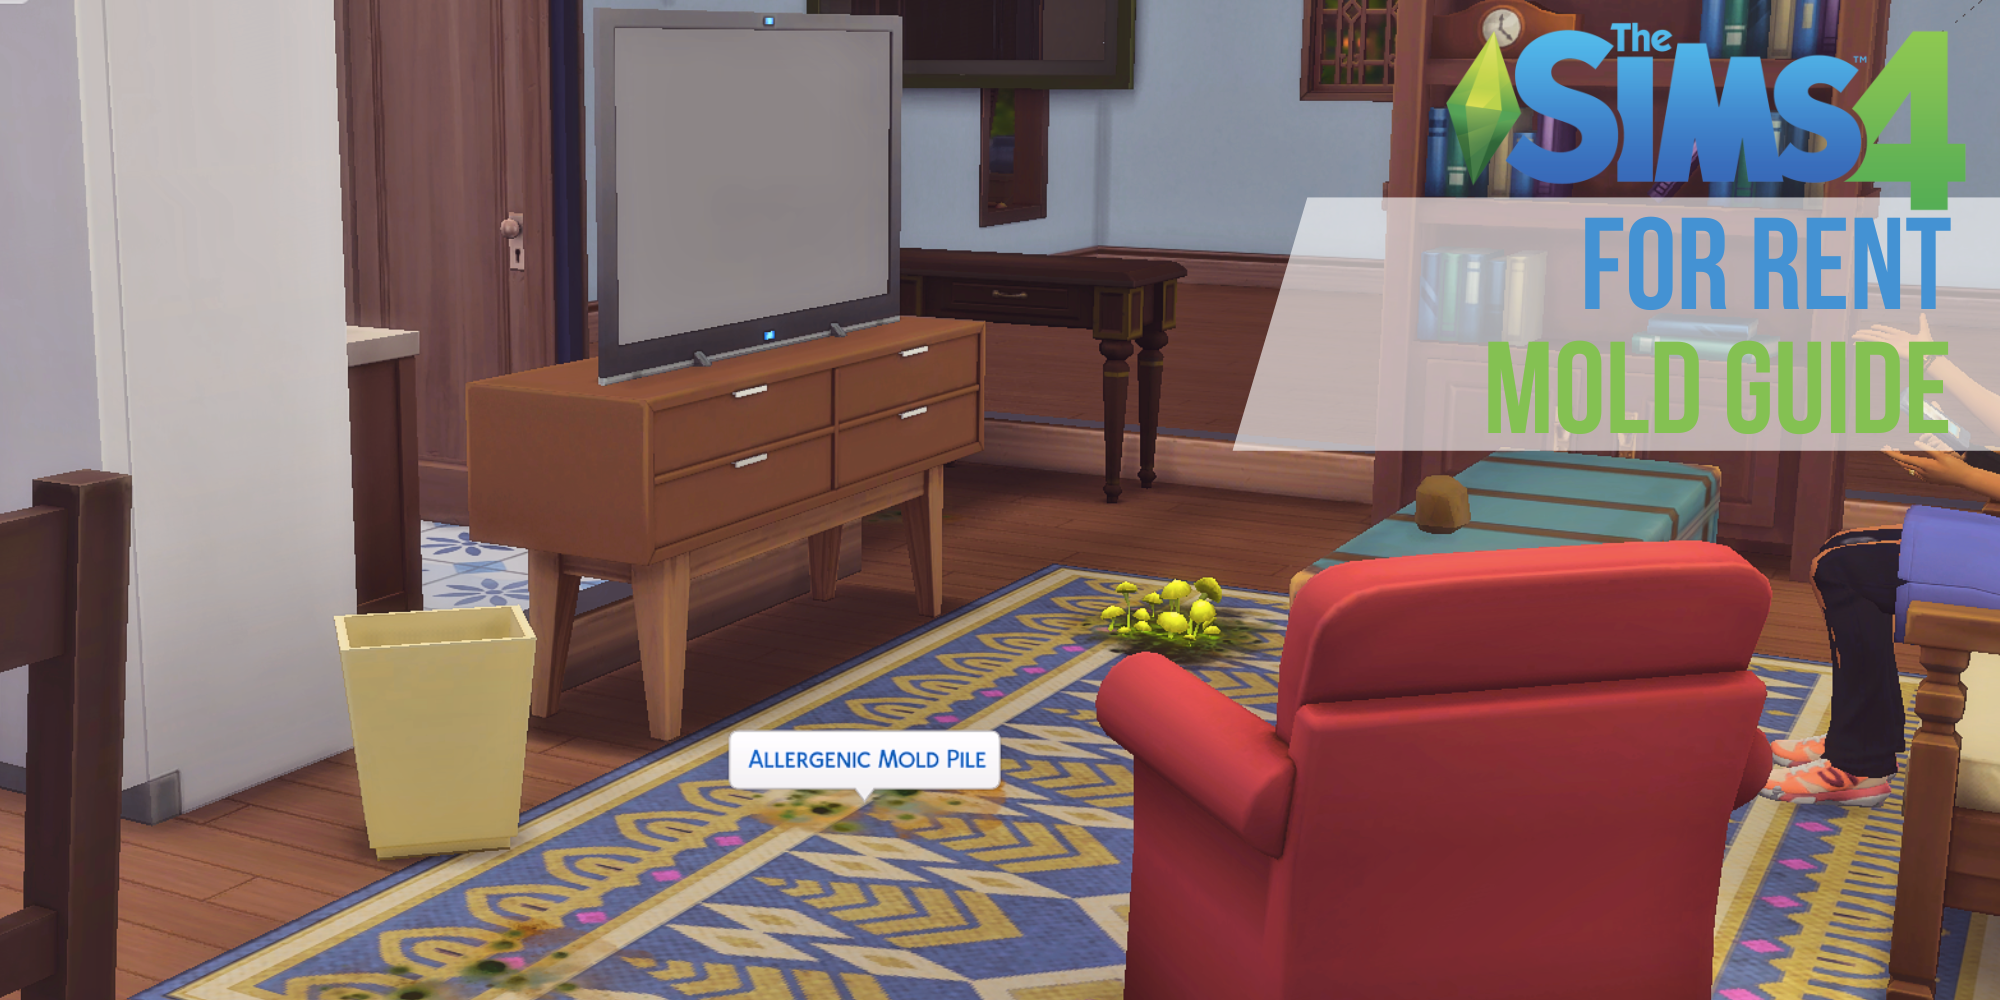 The Sims 4 For Rent Mold Guide